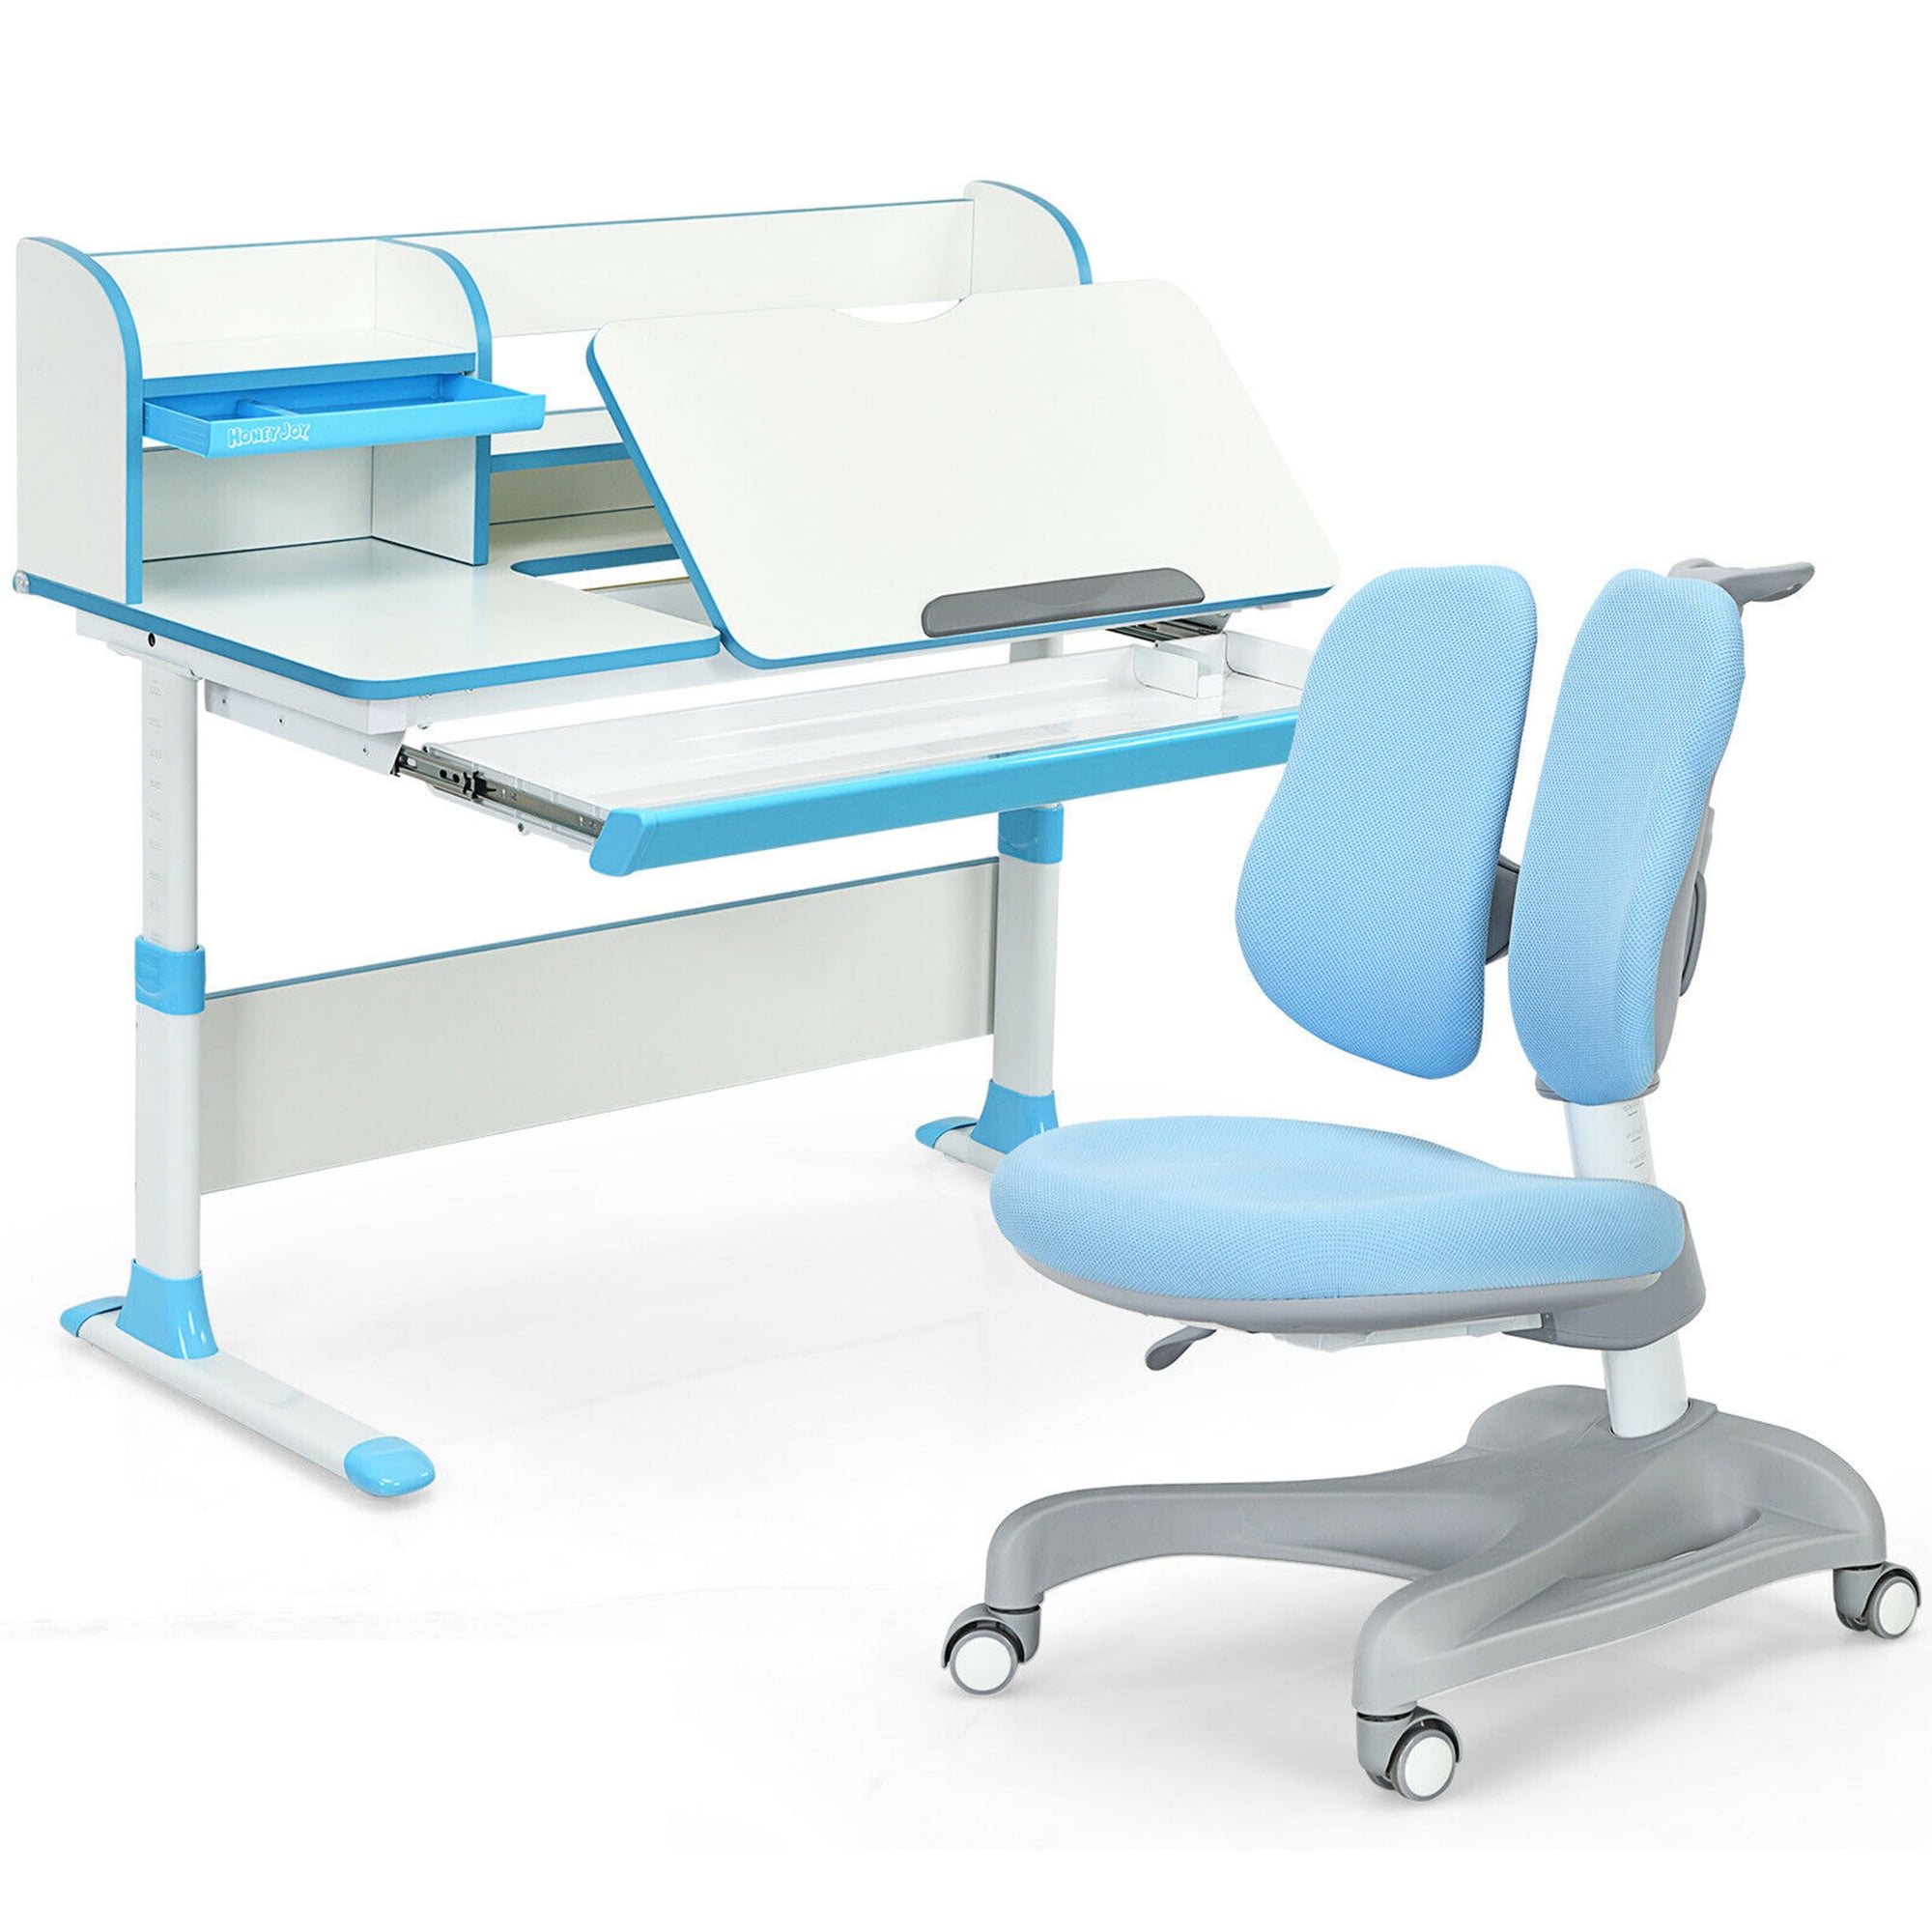 Details about   New 3 Colors Student Desk and Chair Set Adjustable Child Study Home Furniture 